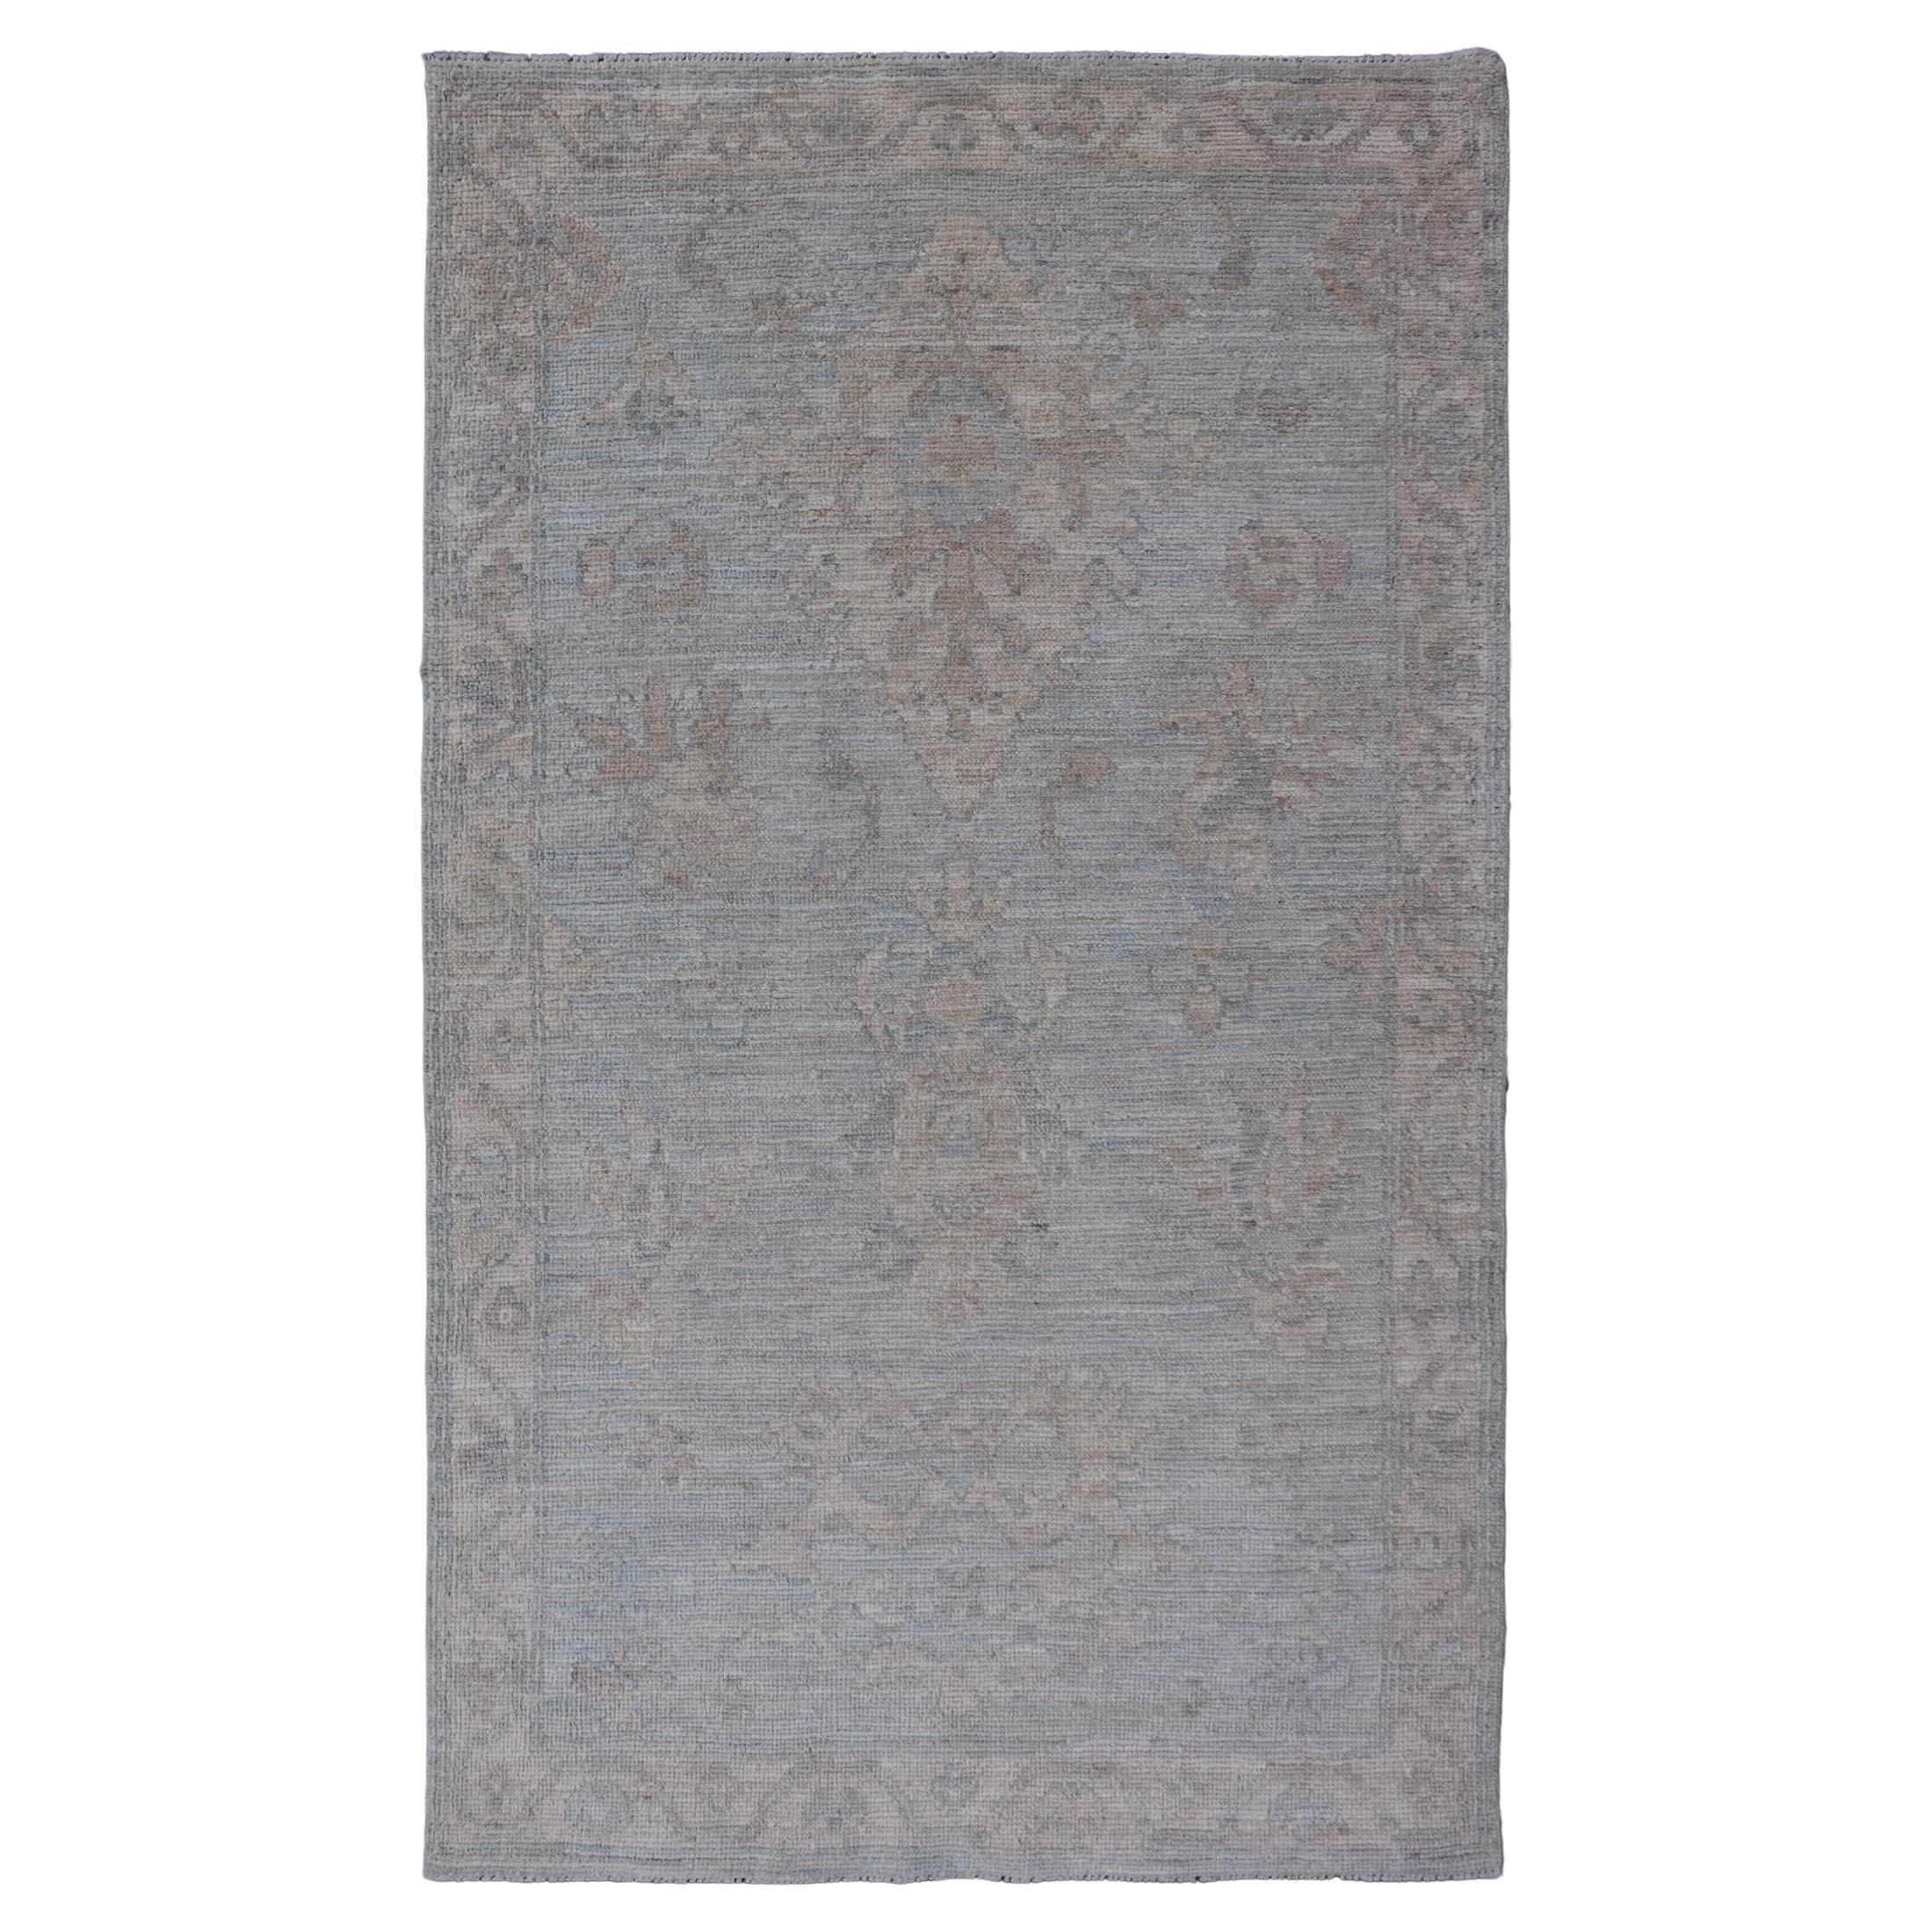 Modern Oushak Rug in All-Over Floral Motifs in Light Blue-Gray and Creams For Sale